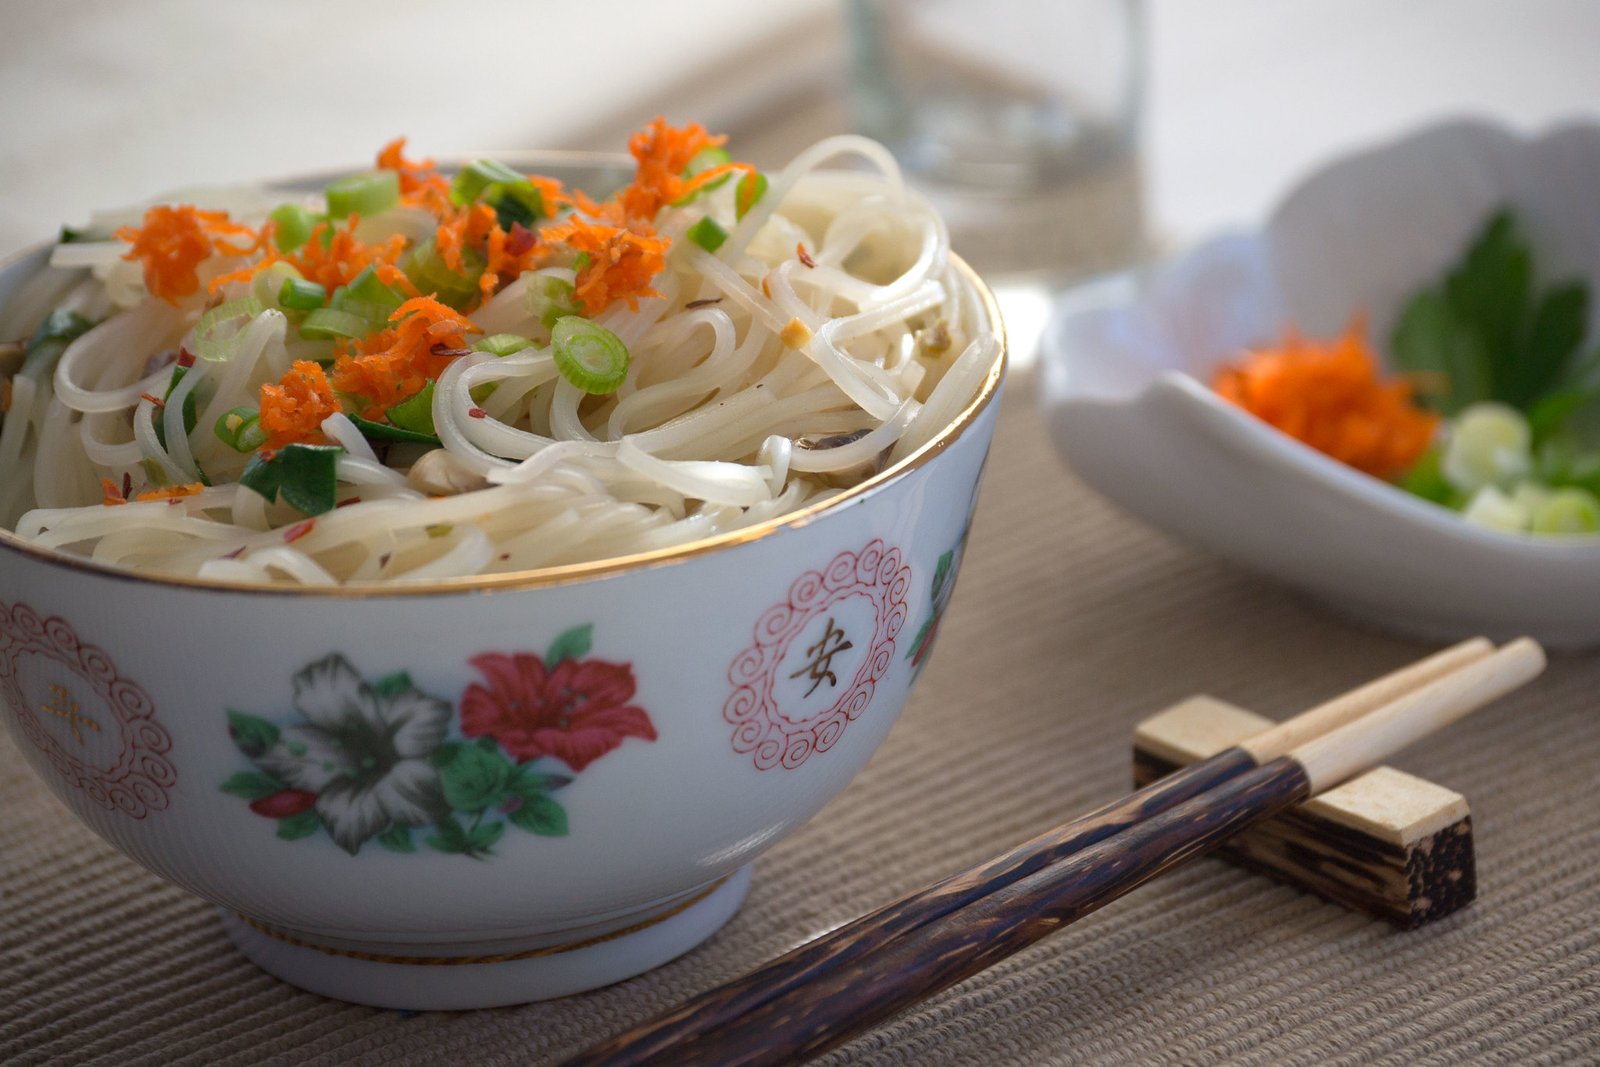 can rice noodles go bad?